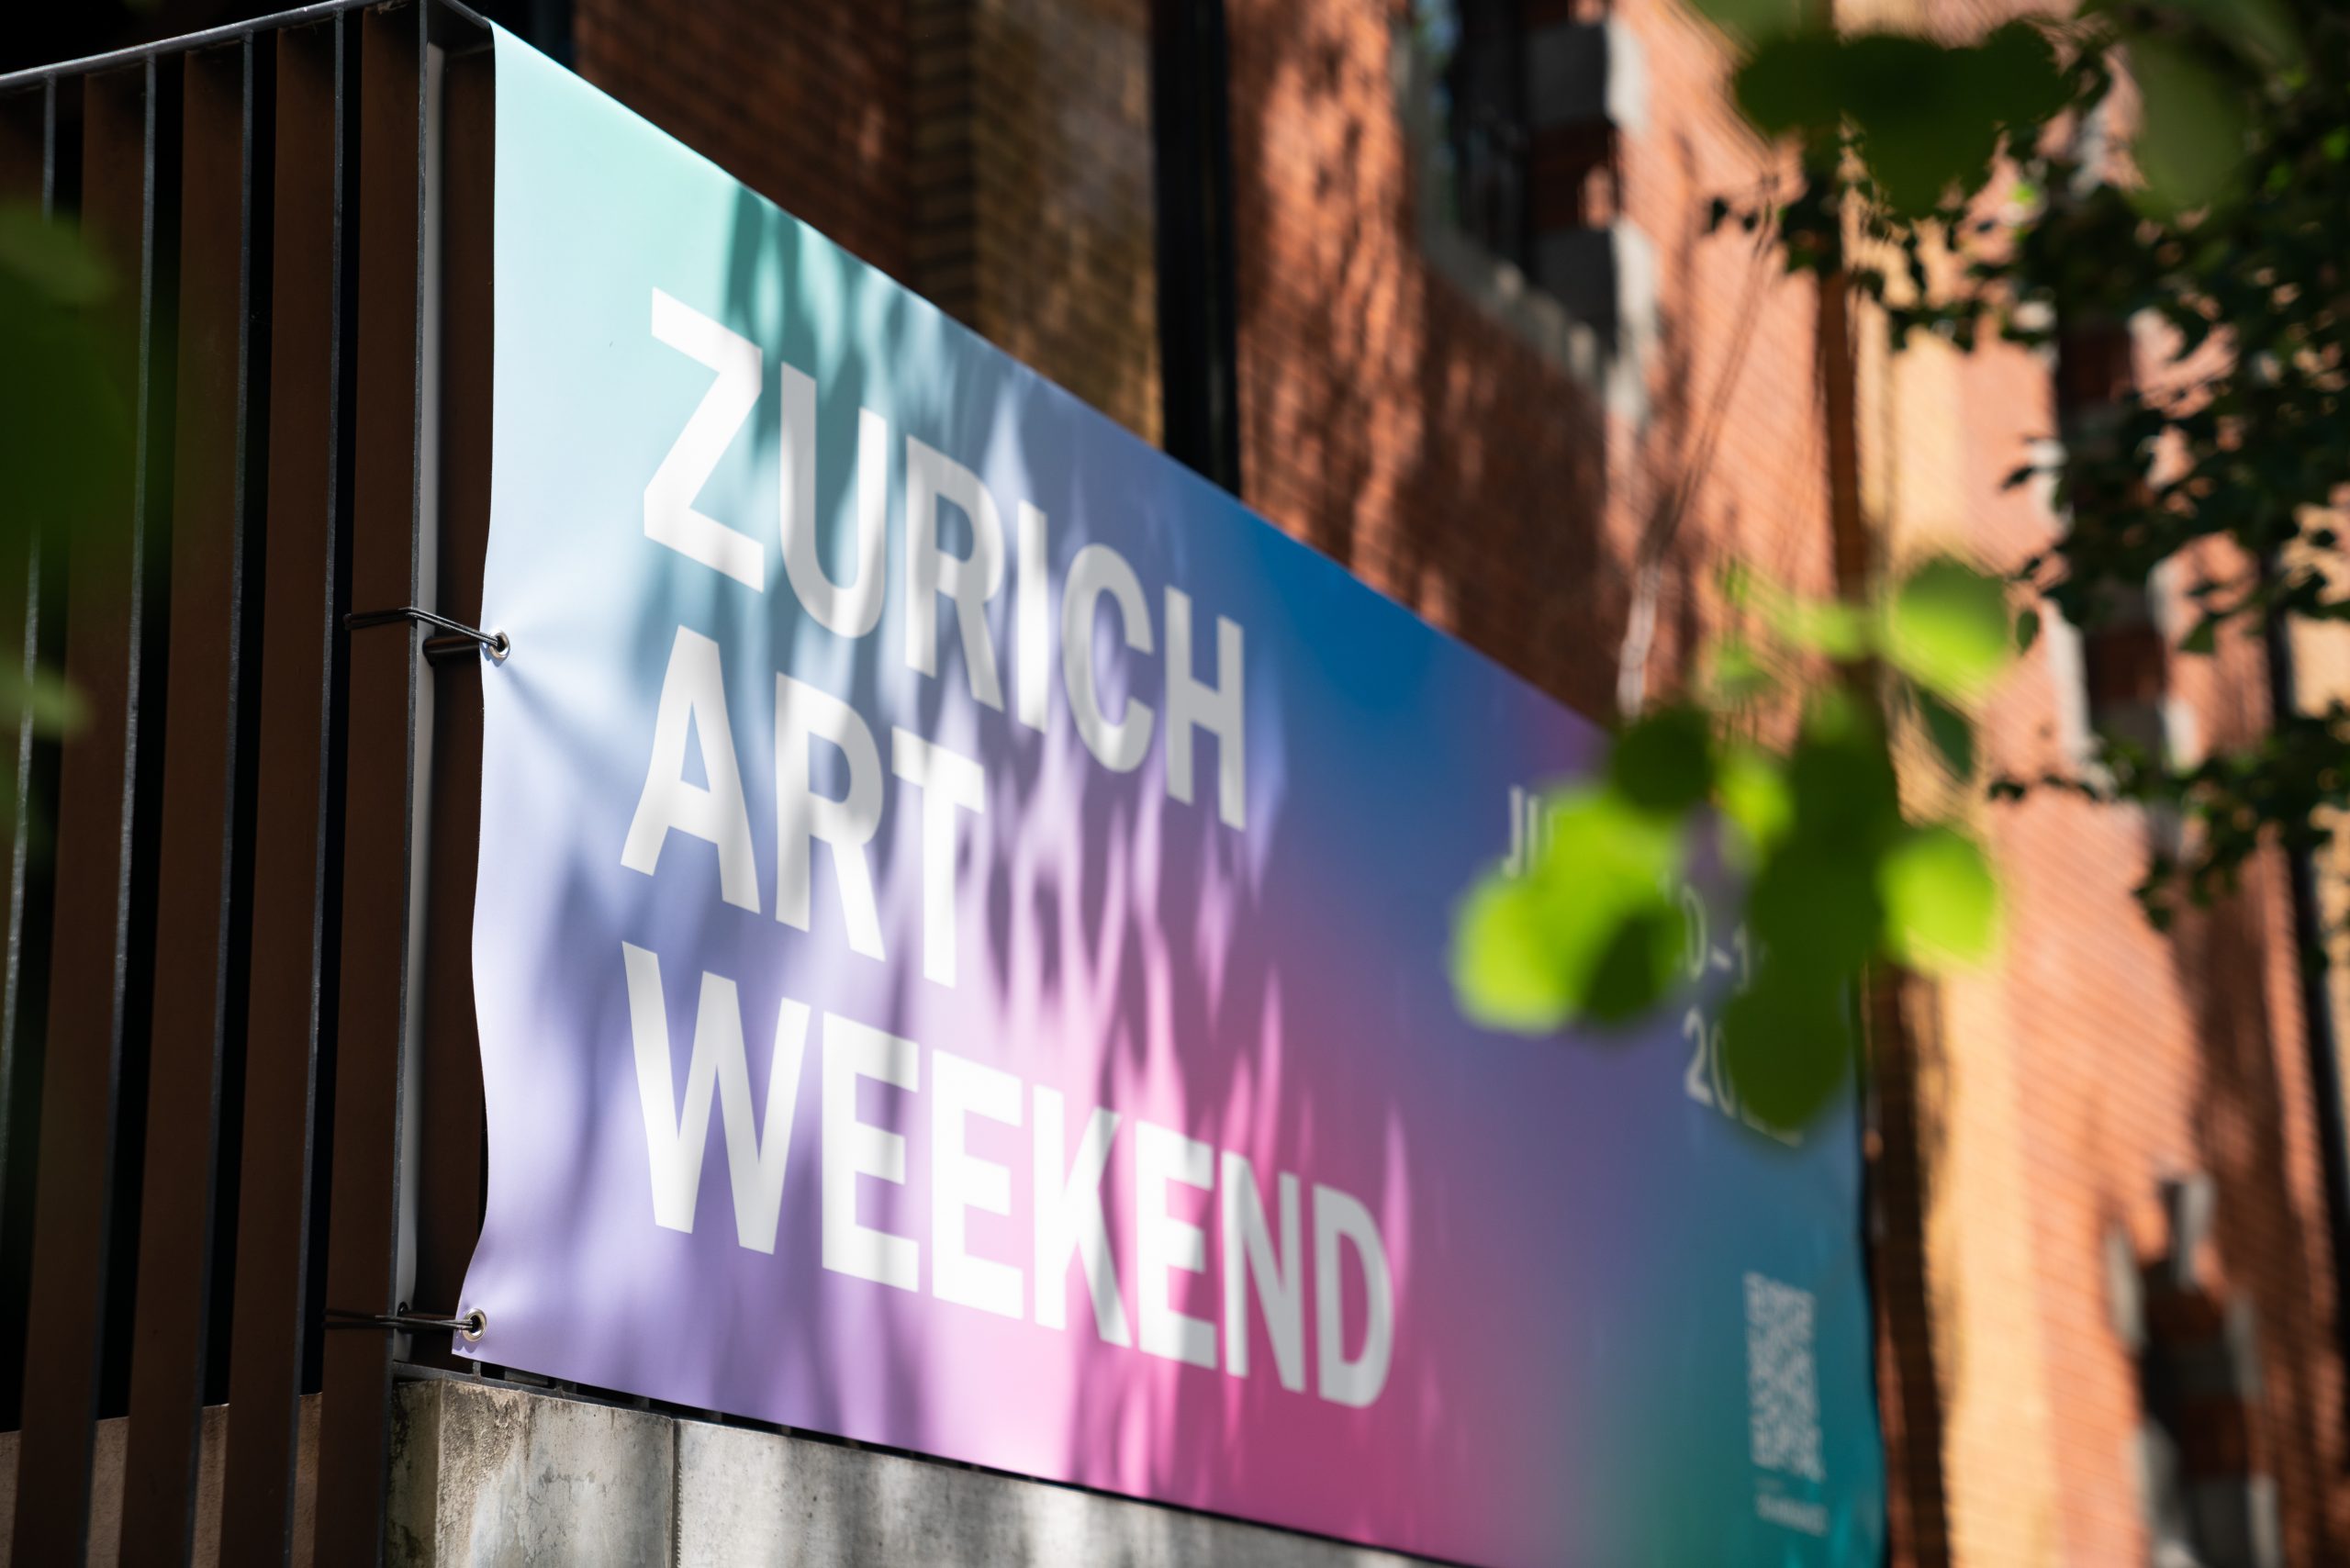 Zurich Art Week will be all about artificial intelligence, with technology-focused art exhibitions, talks and events throughout the city.  Here are our top picks |  Artnet news